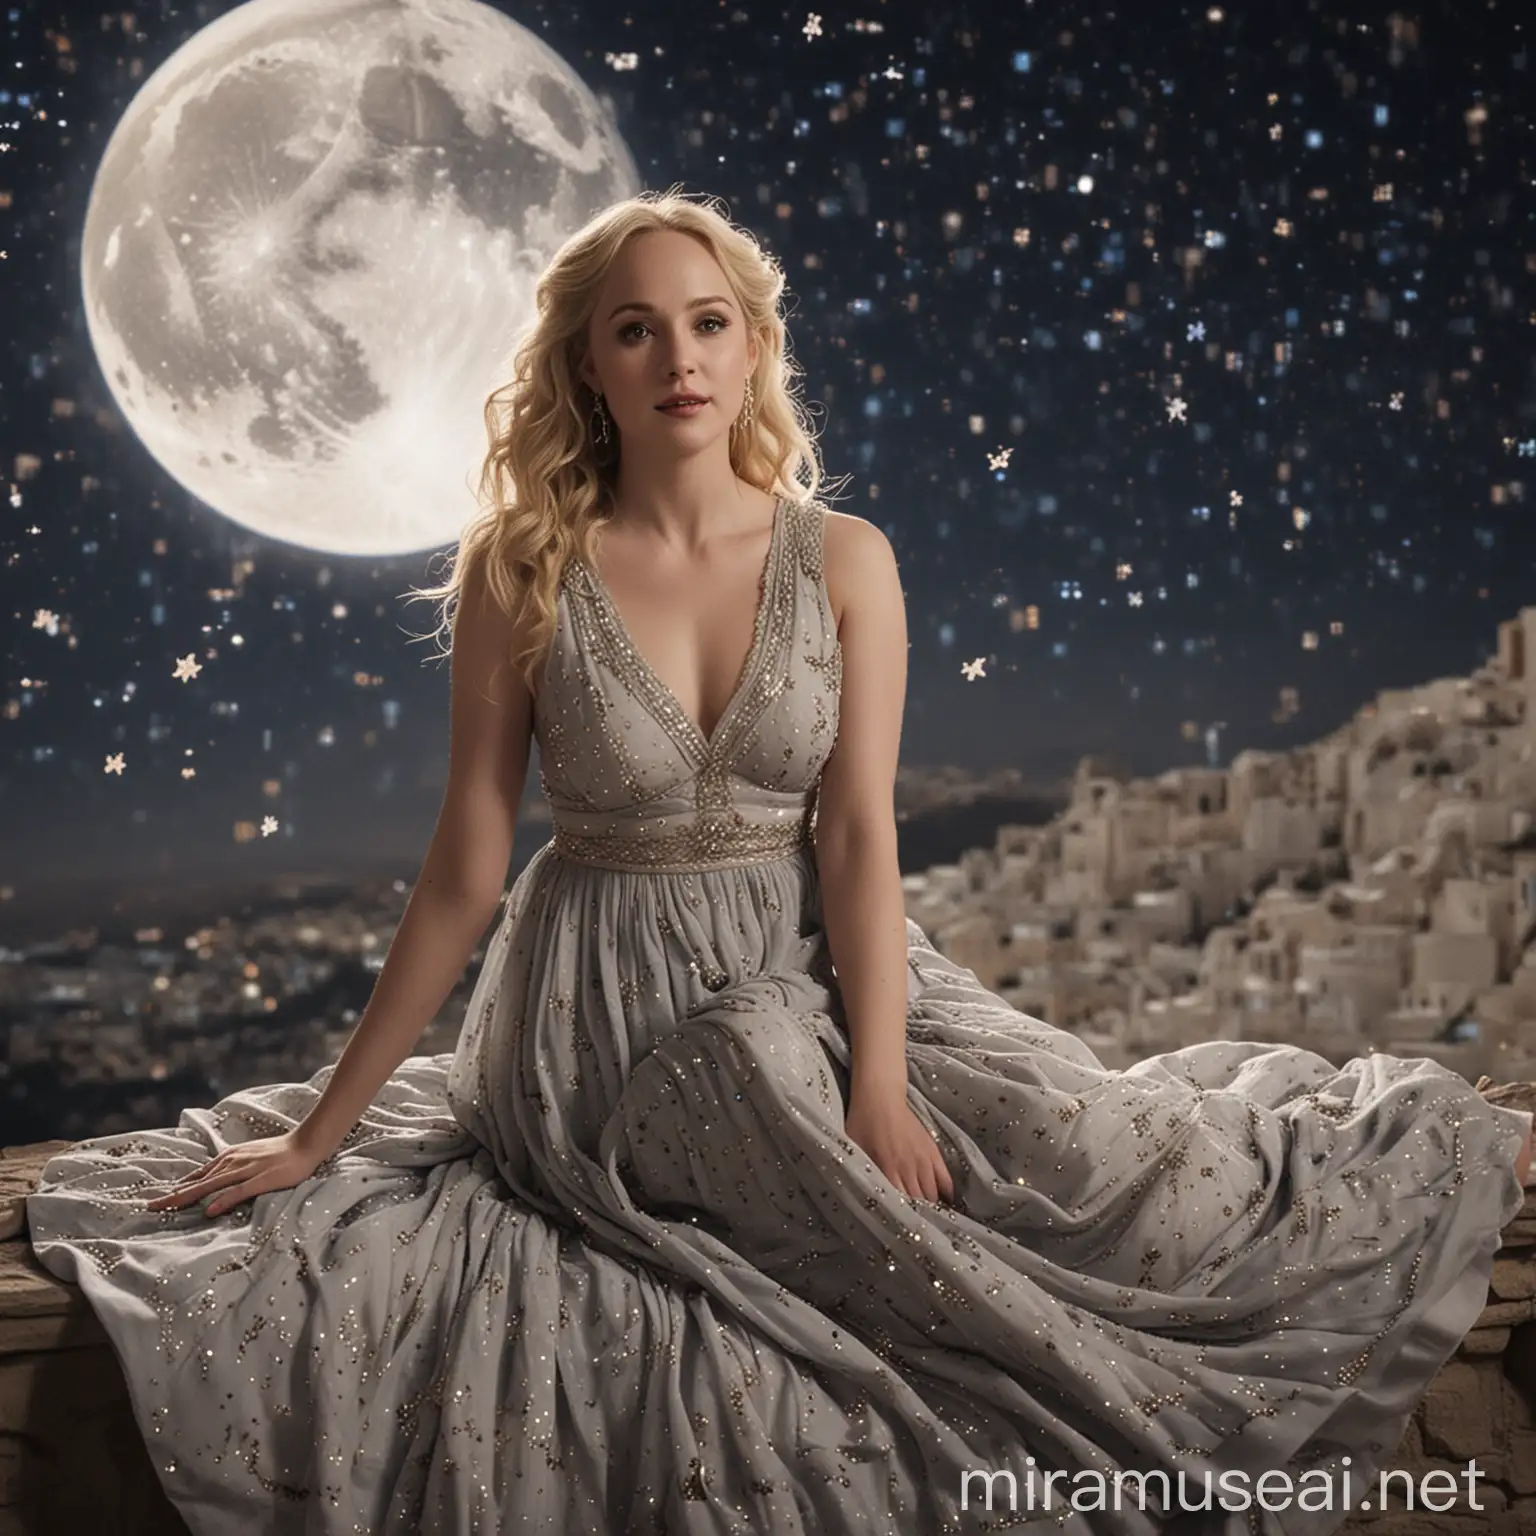 Masterpieced, Candice Accola young, she is sitting on the crescent moon, skynight, stars, semitransparent Greek dress